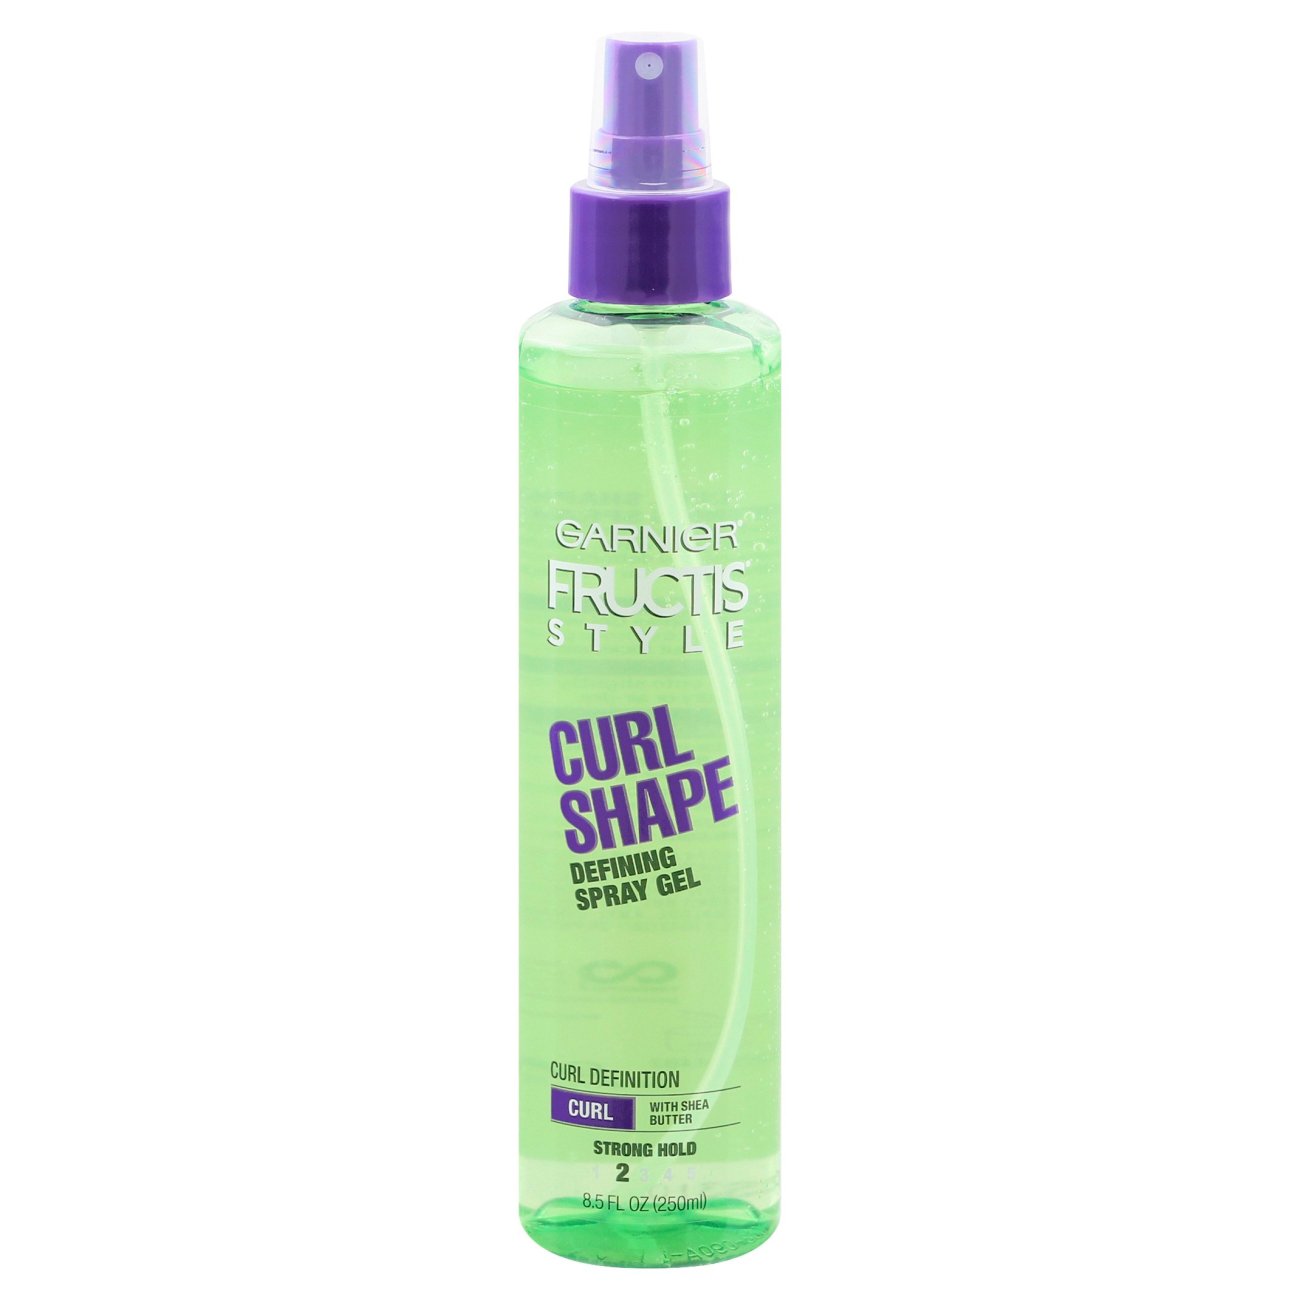 Garnier Fructis Style Curl Shape Defining Spray Gel with Coconut Water -  Shop Hair Care at H-E-B